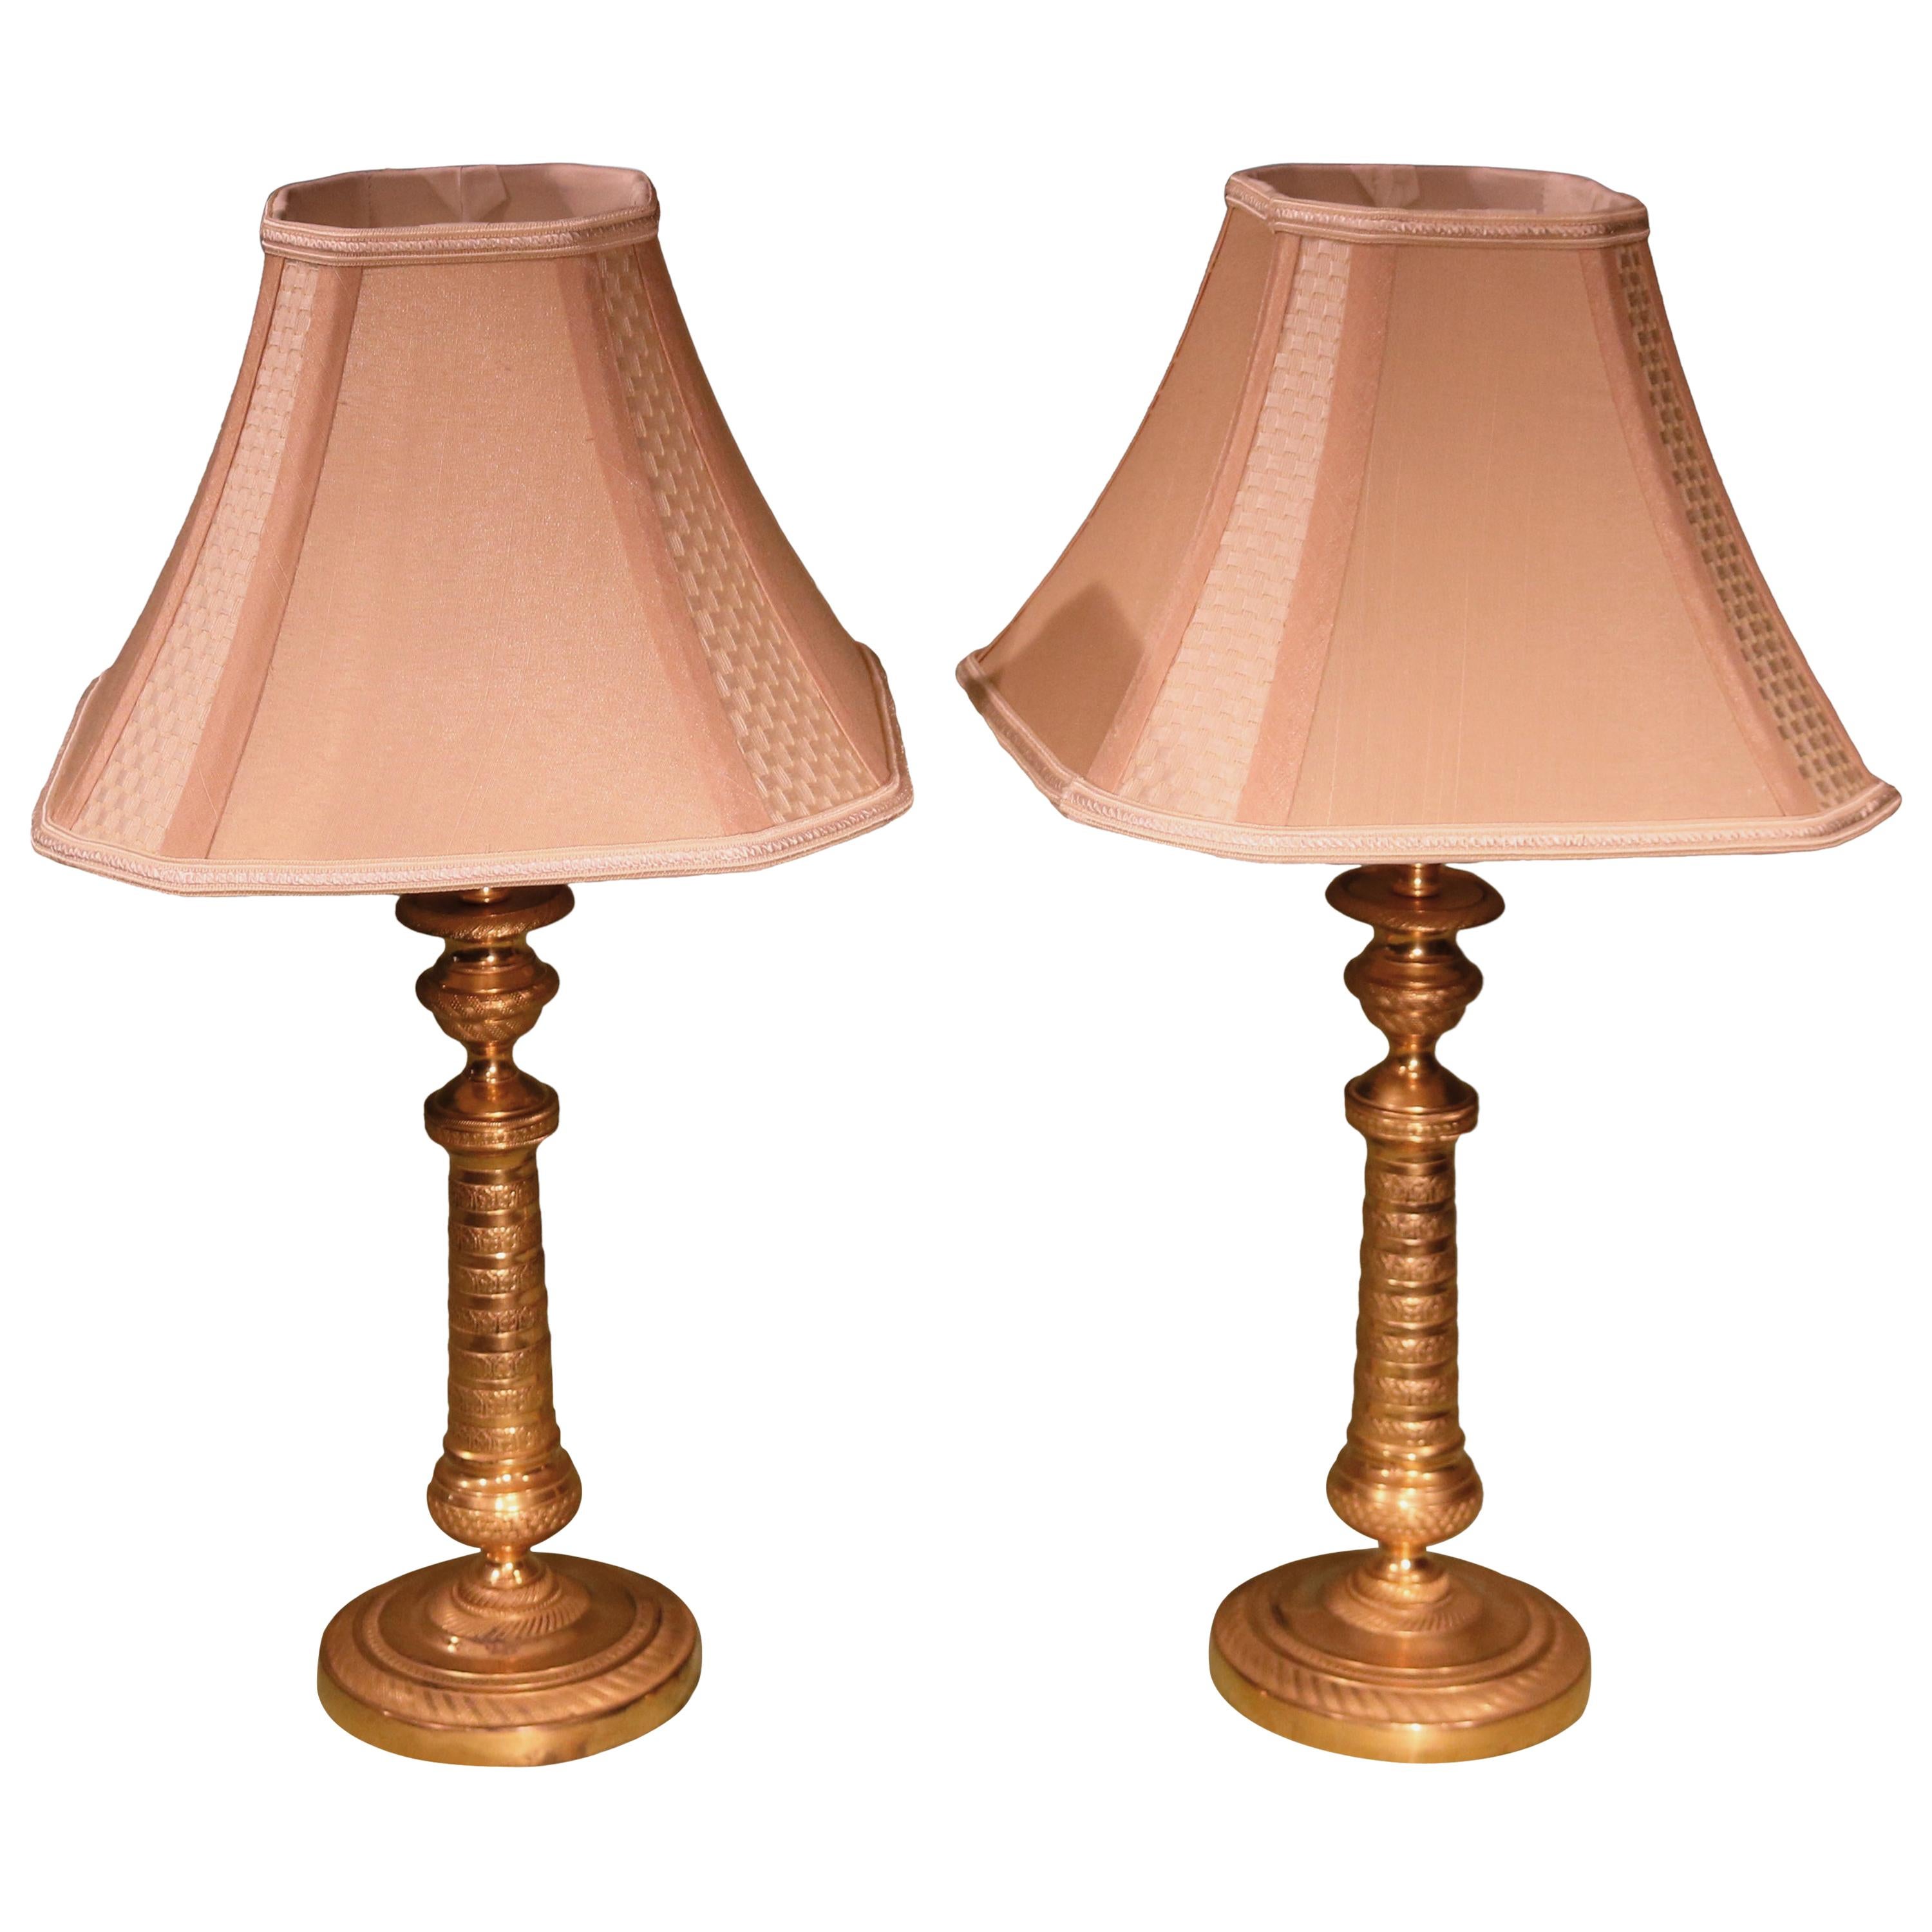 Pair of 19th Century Ormolu Candlestick Lamps For Sale